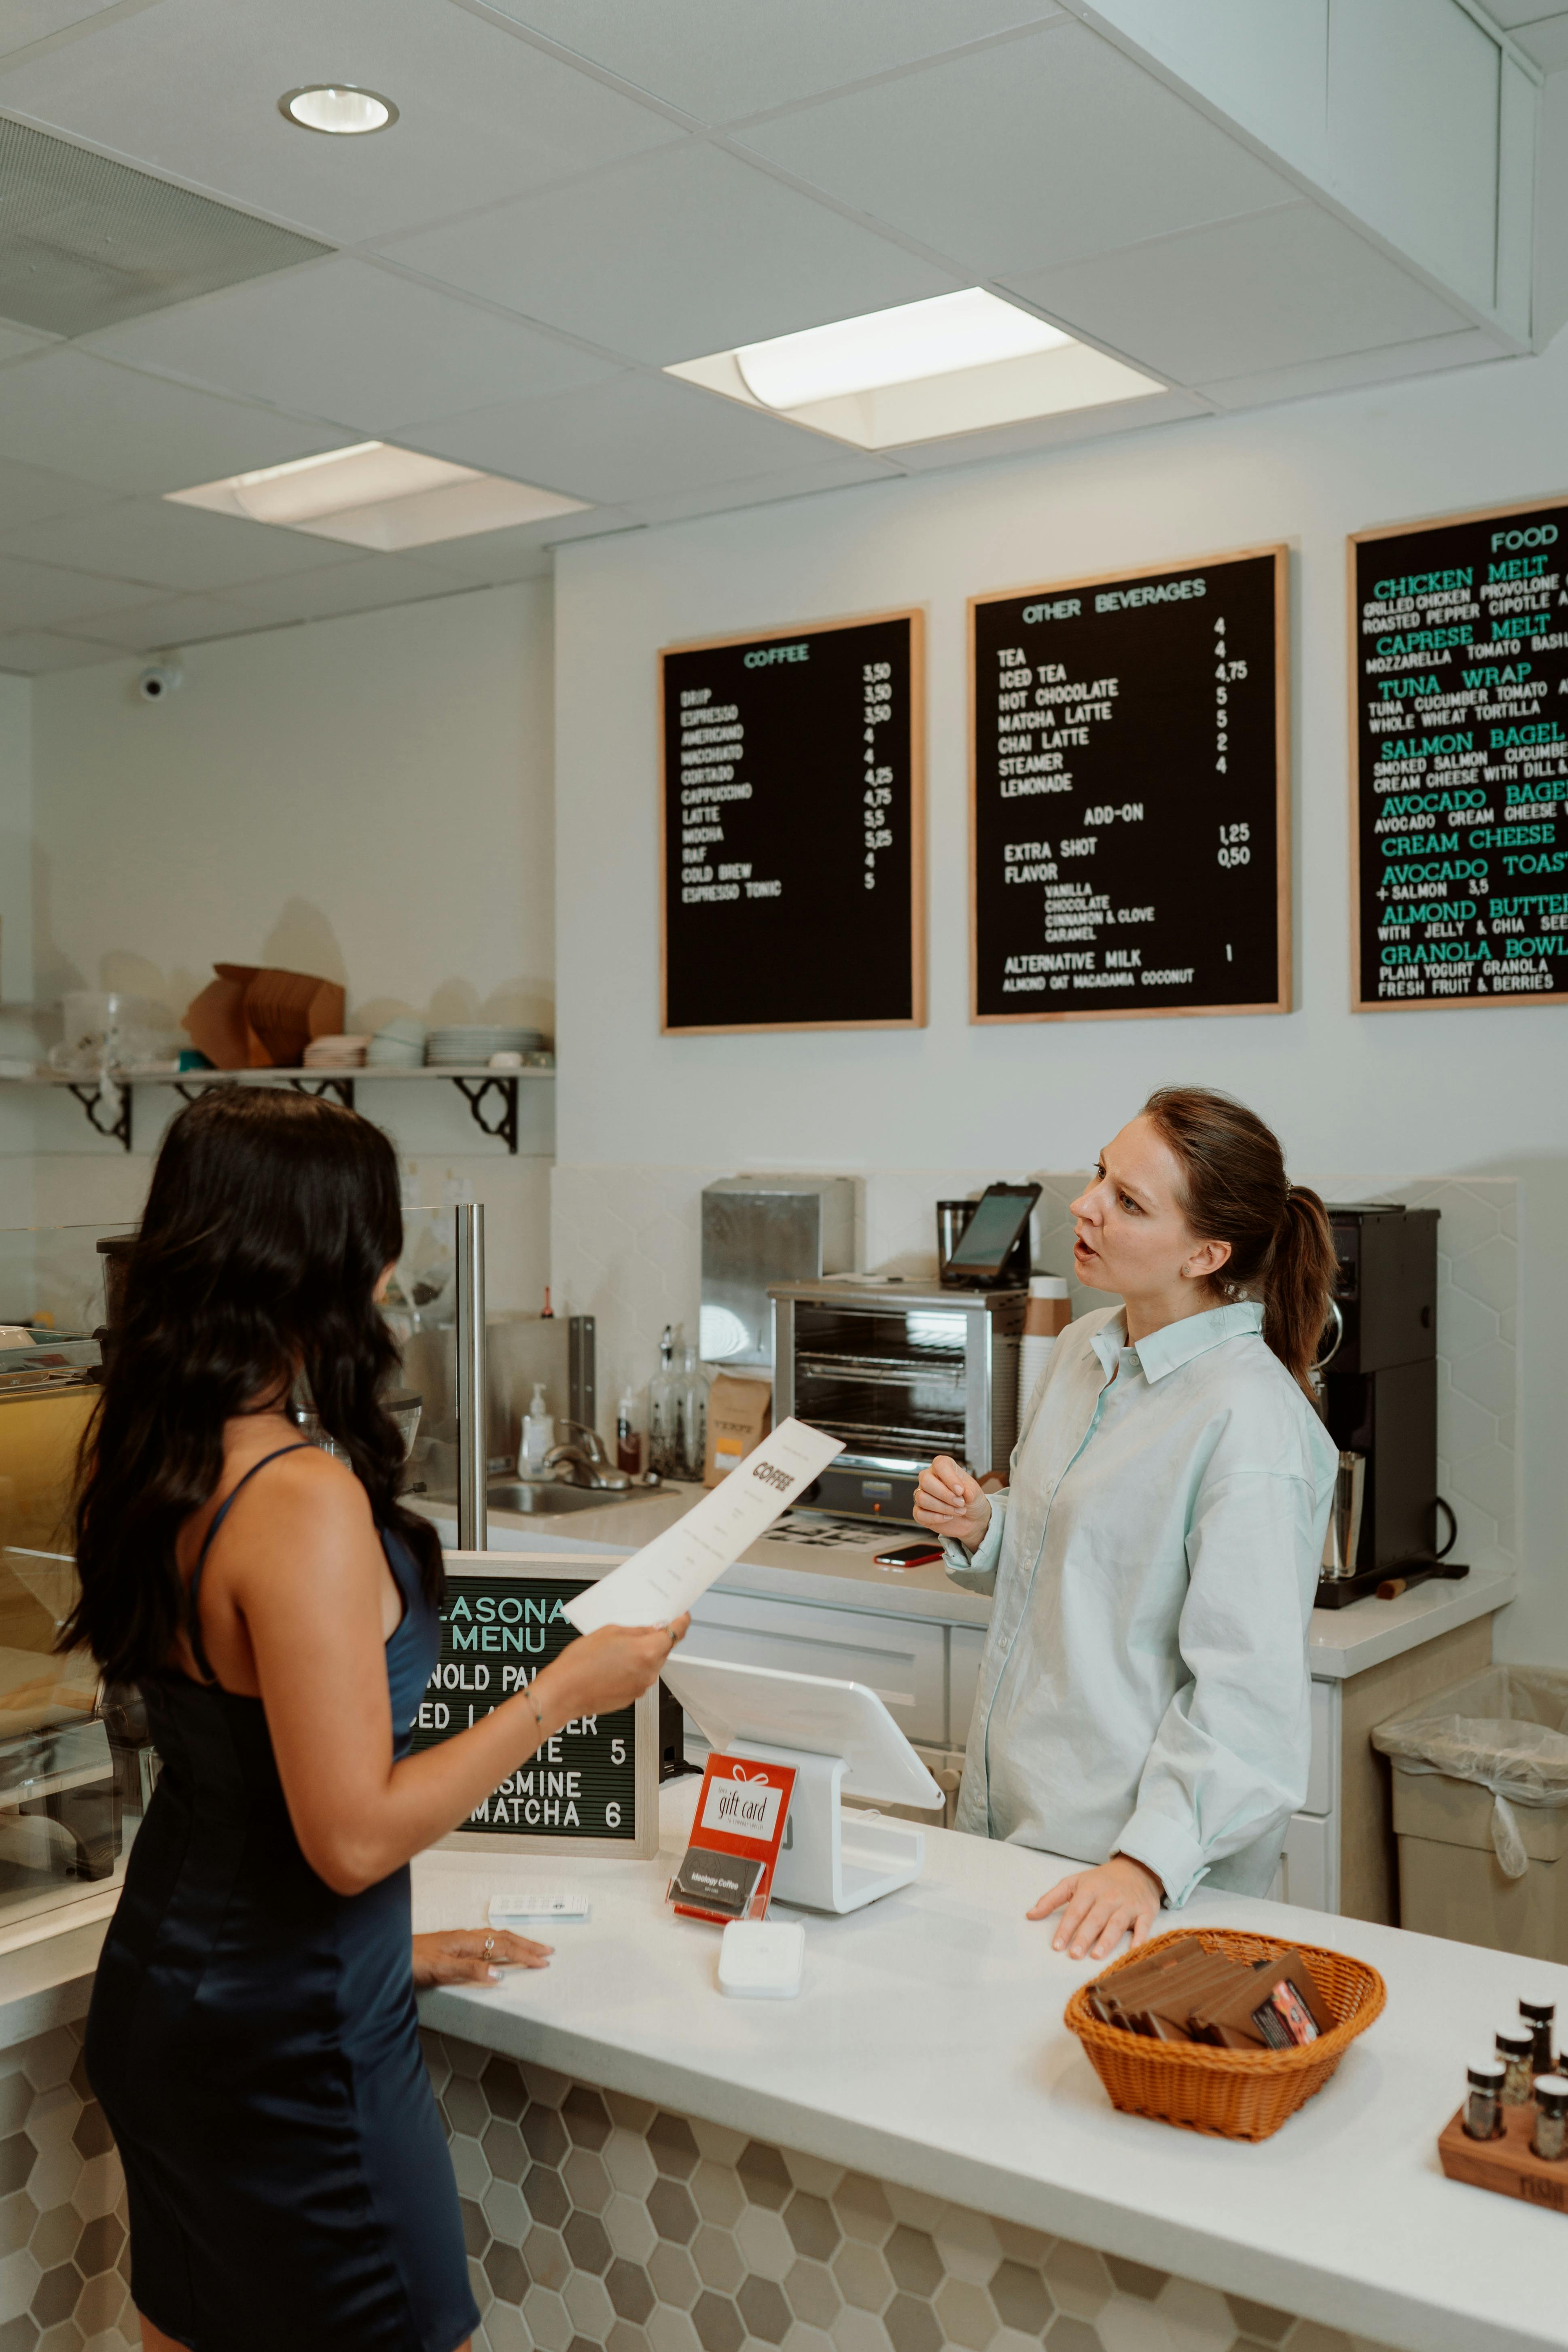 A female cashier having a conversation with a customer | Source: Pexels